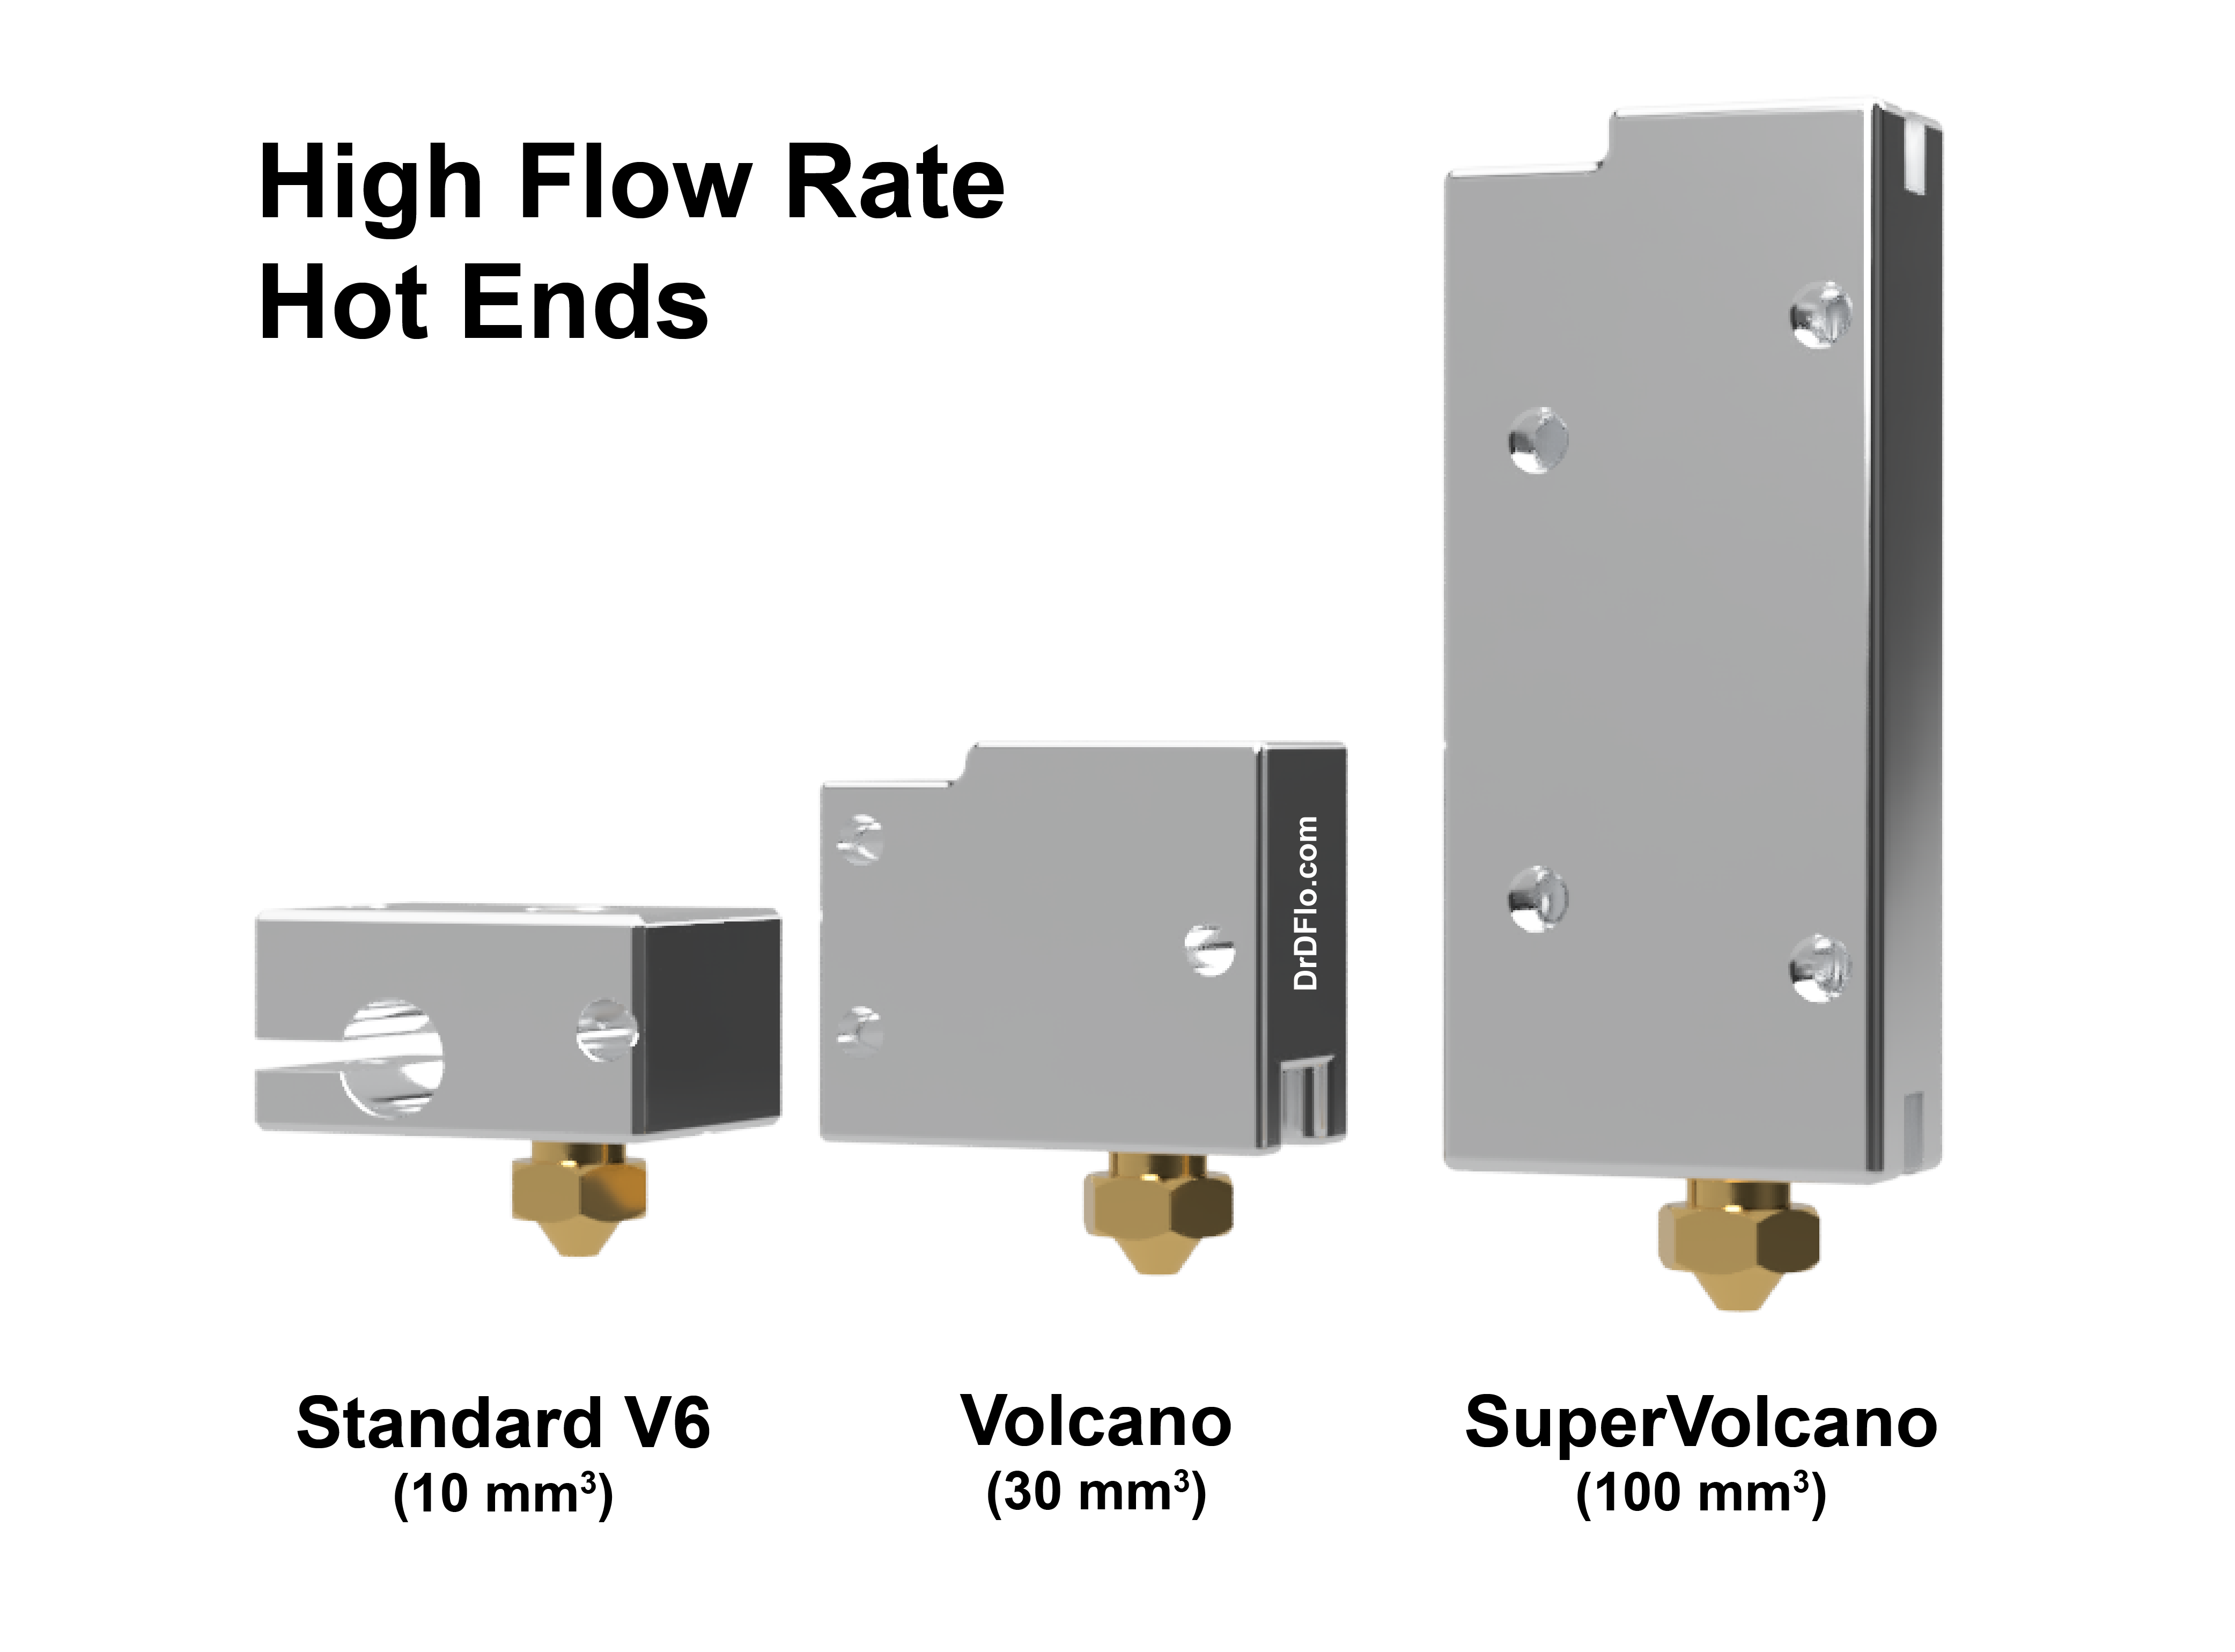 Length comparison of high flow rate hot ends fro 3D printing: standard V6, volcano, super volcano.